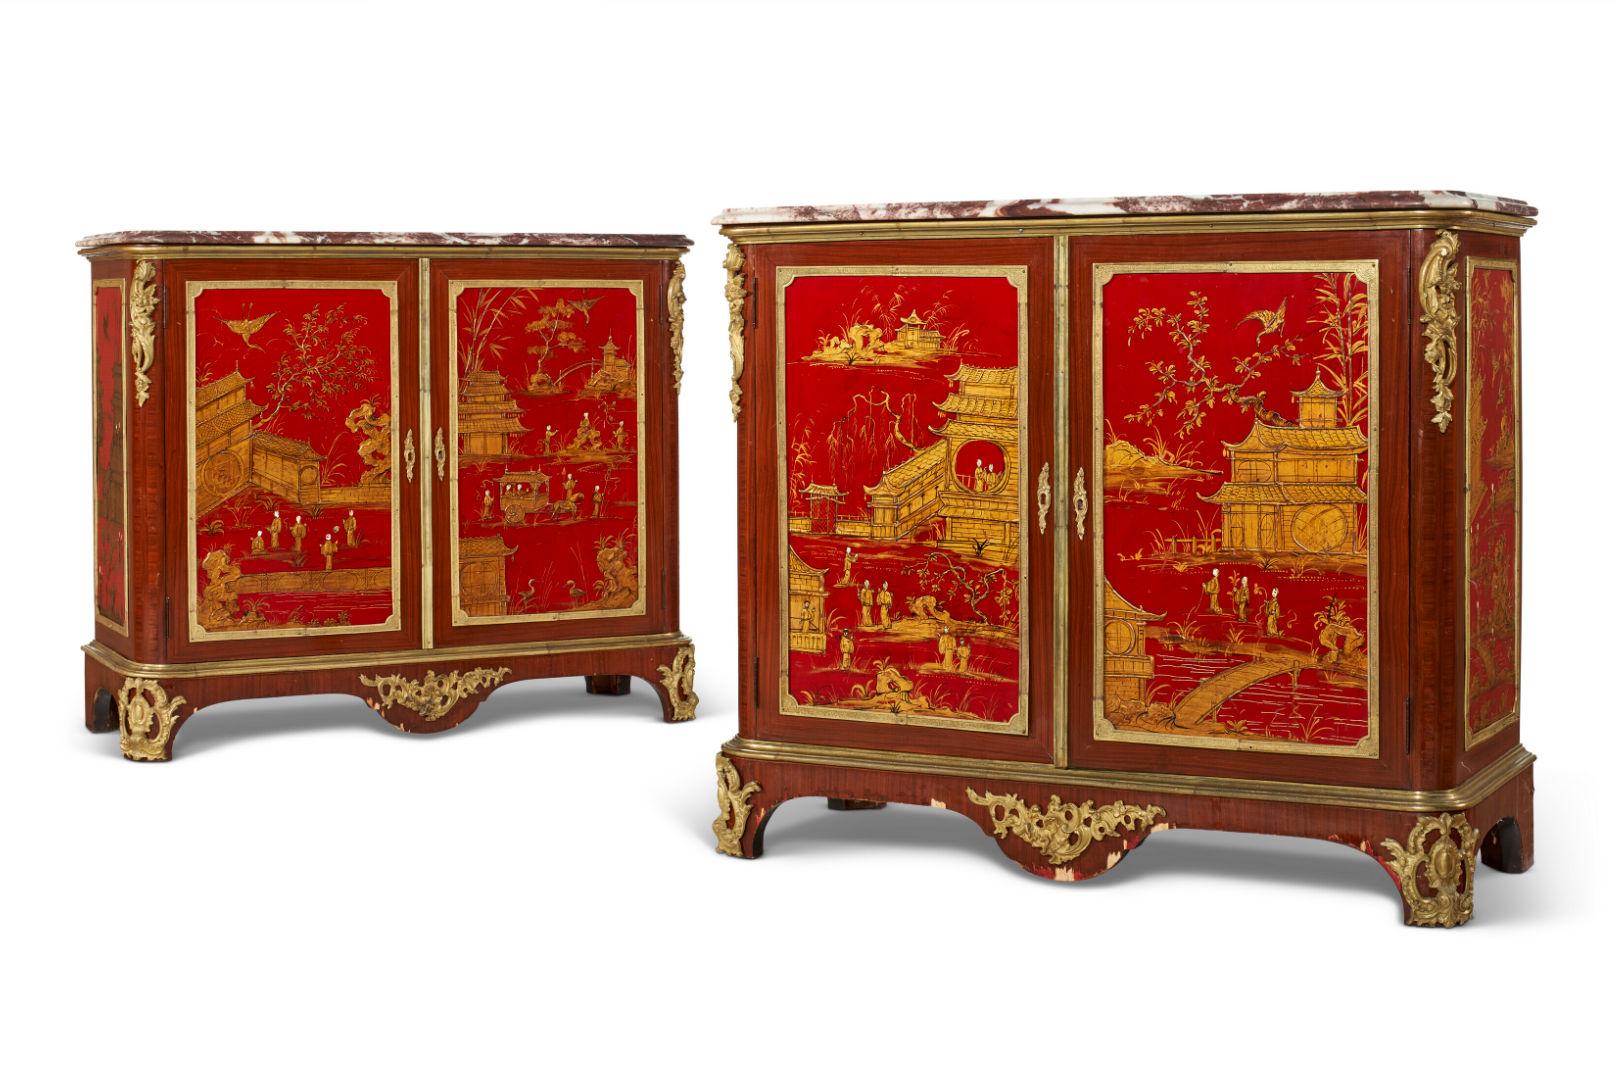 Our fabulous pair of French chinoiserie side cabinets with mahogany veneer feature ormolu bronze mounts and carved red lacquer panels on the doors depicting palaces and courtyard scenes, and side panels depicting landscapes with flowers and birds.